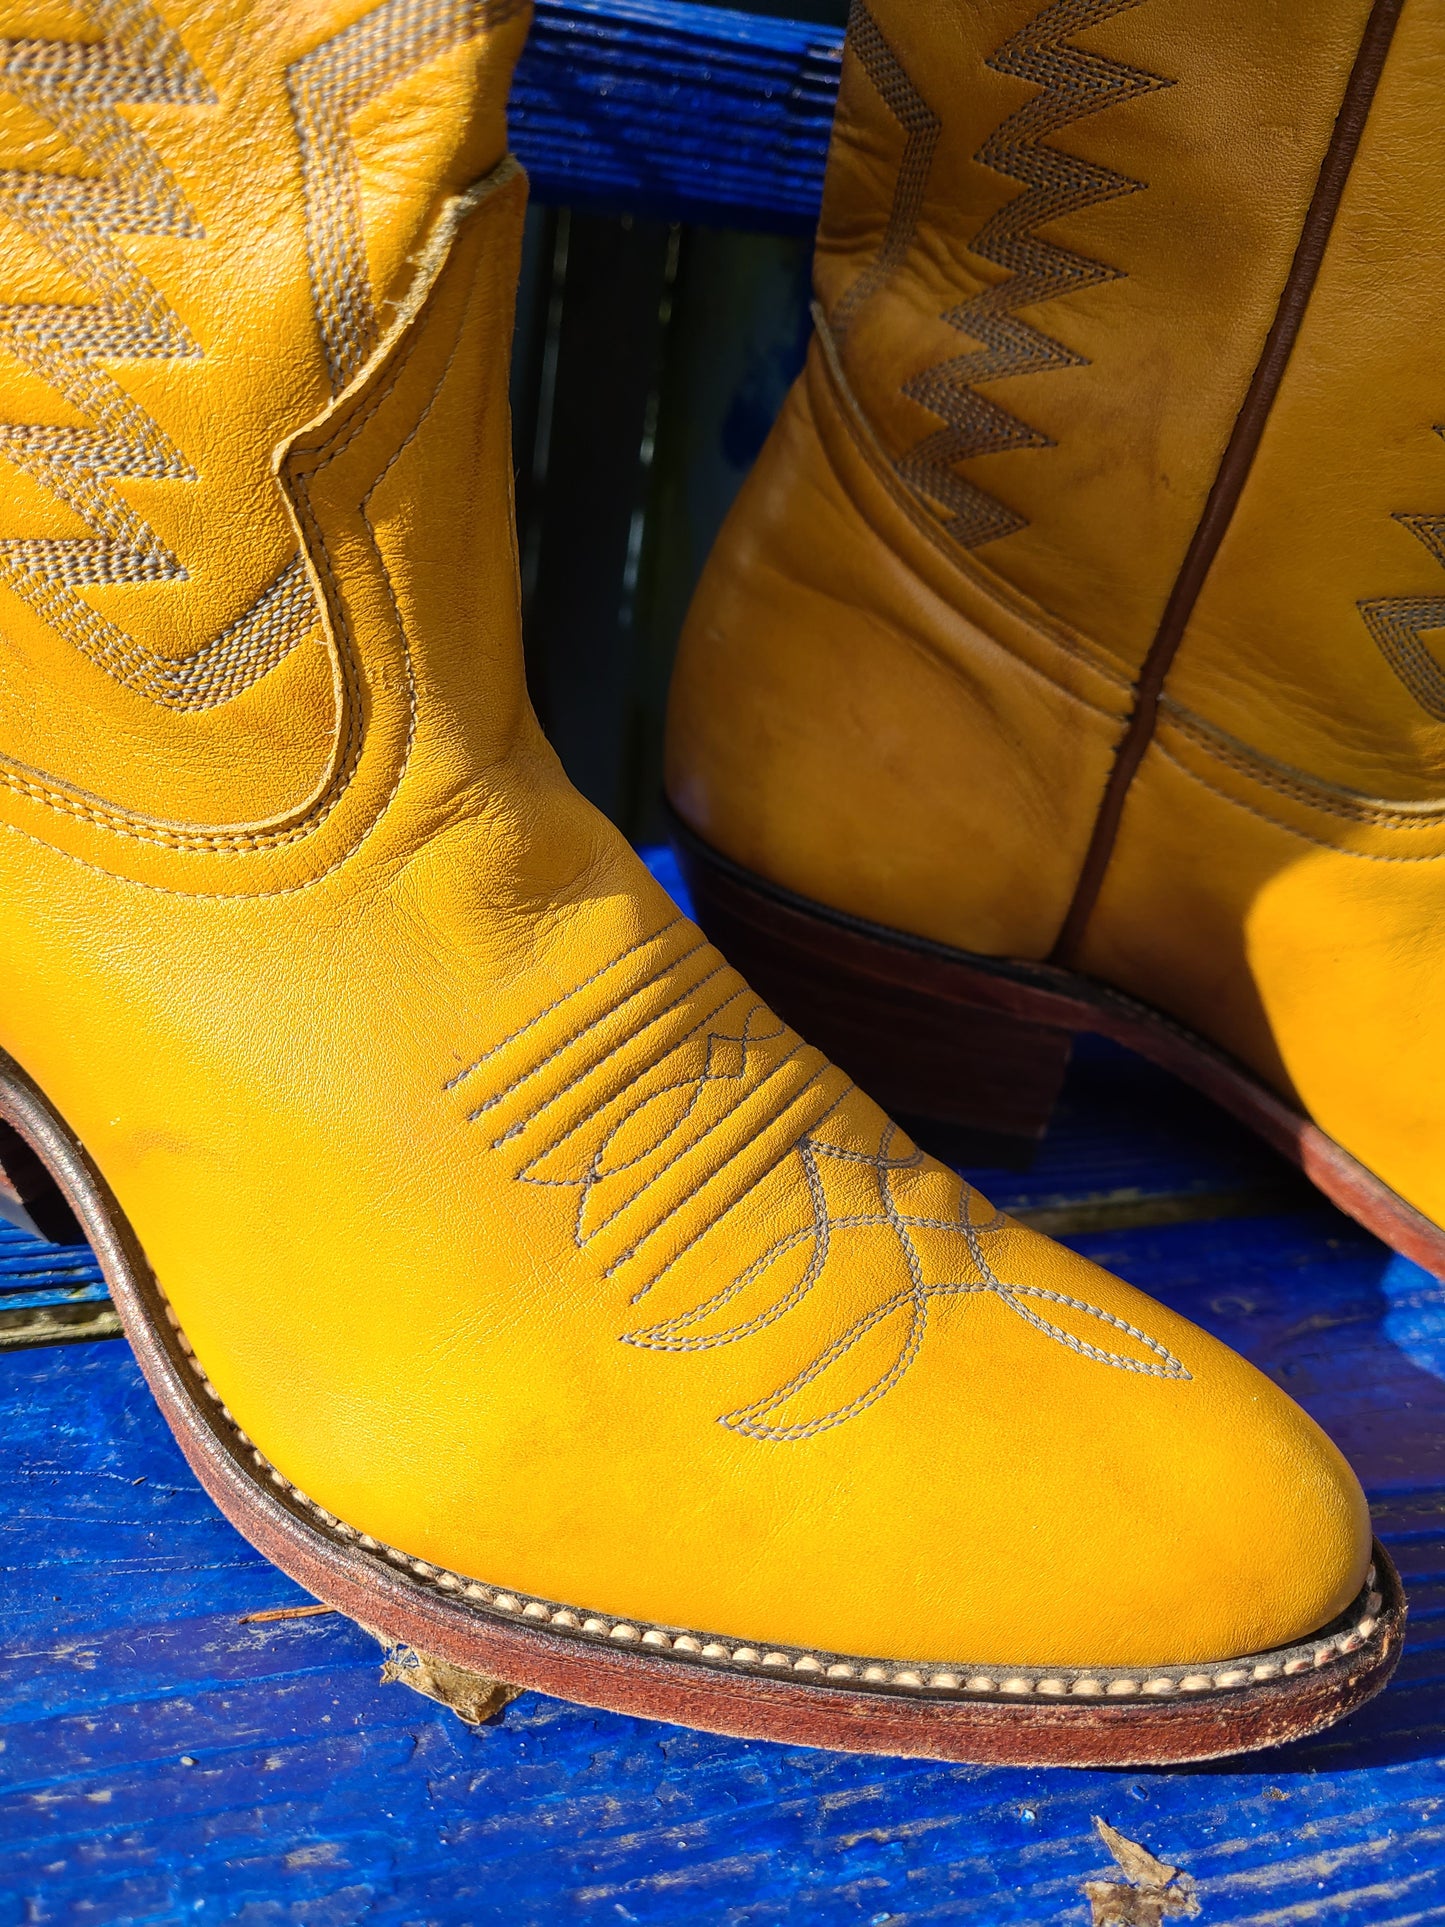 The Goldie Hawn Vintage Cowboy Boots by Boulet 7.5